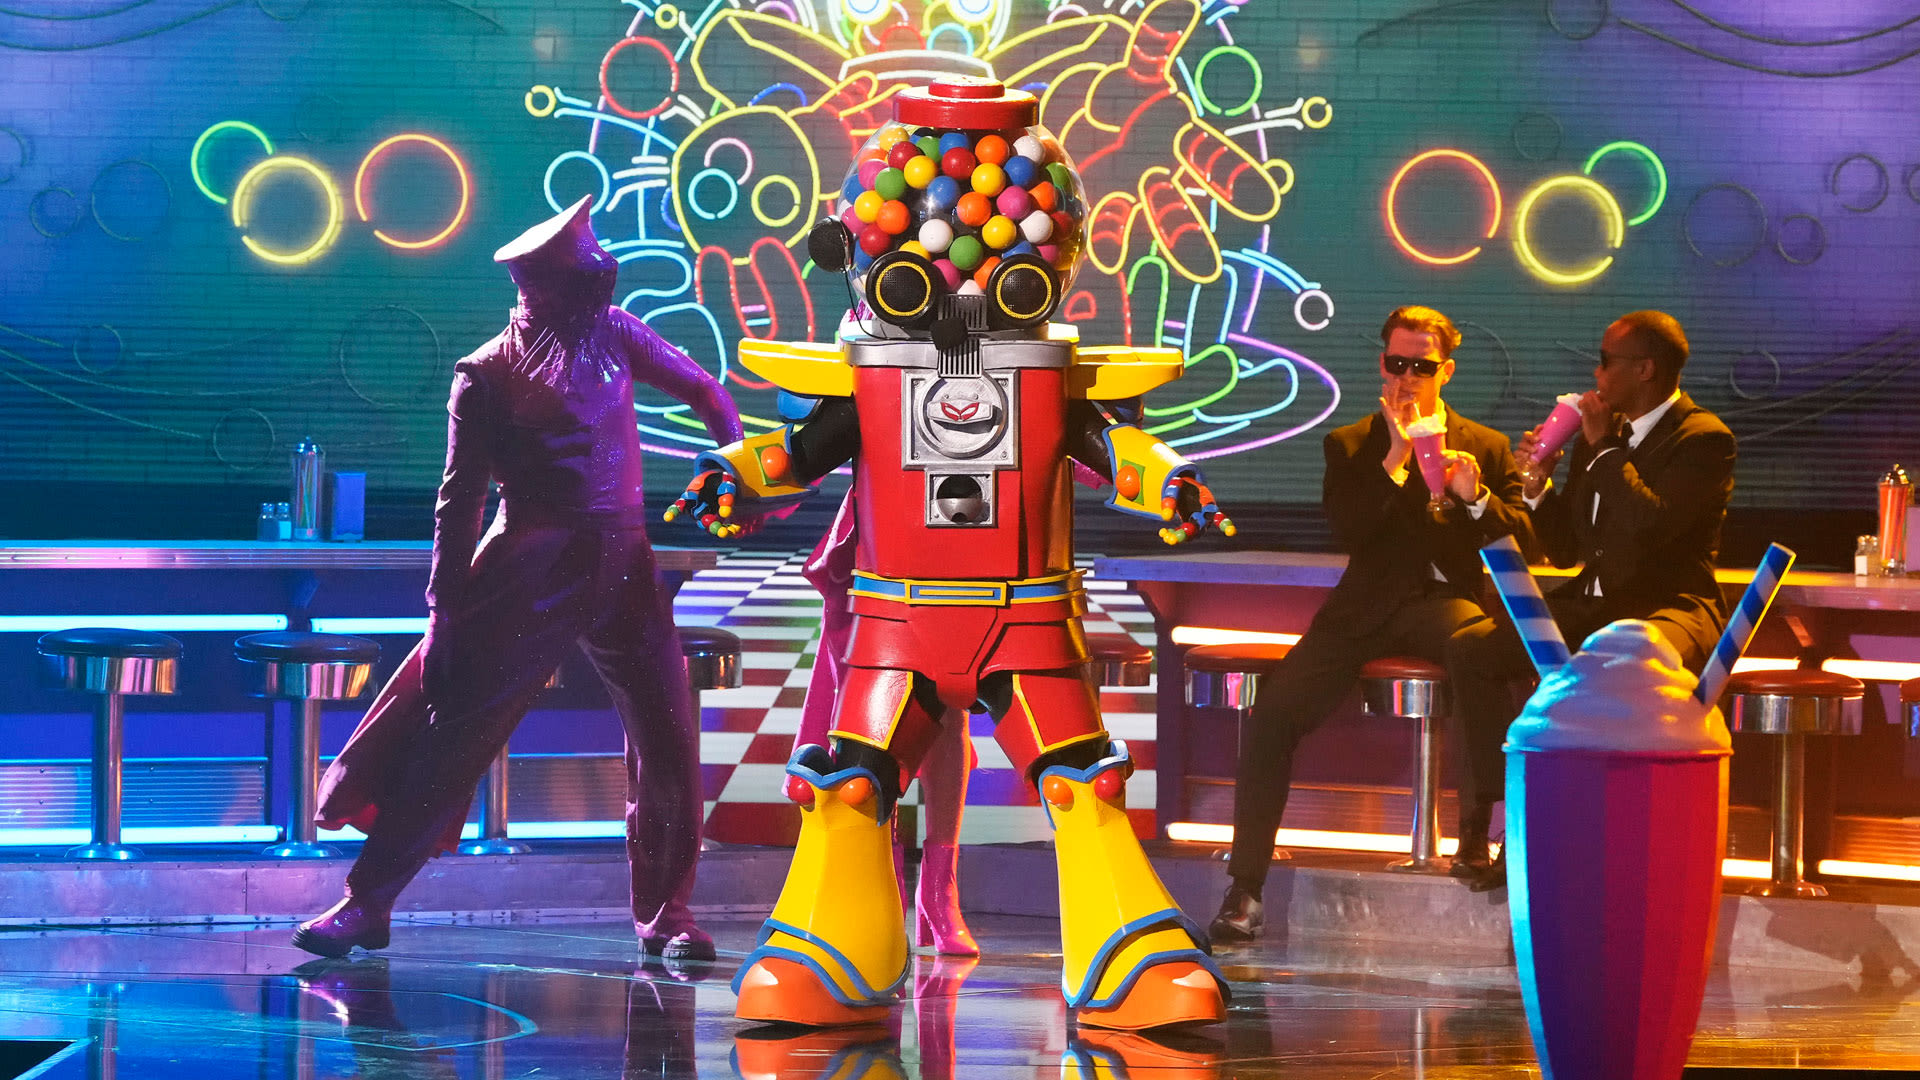 Masked Singer's Gumball reveals connection to Ken Jeong before quarter-finals